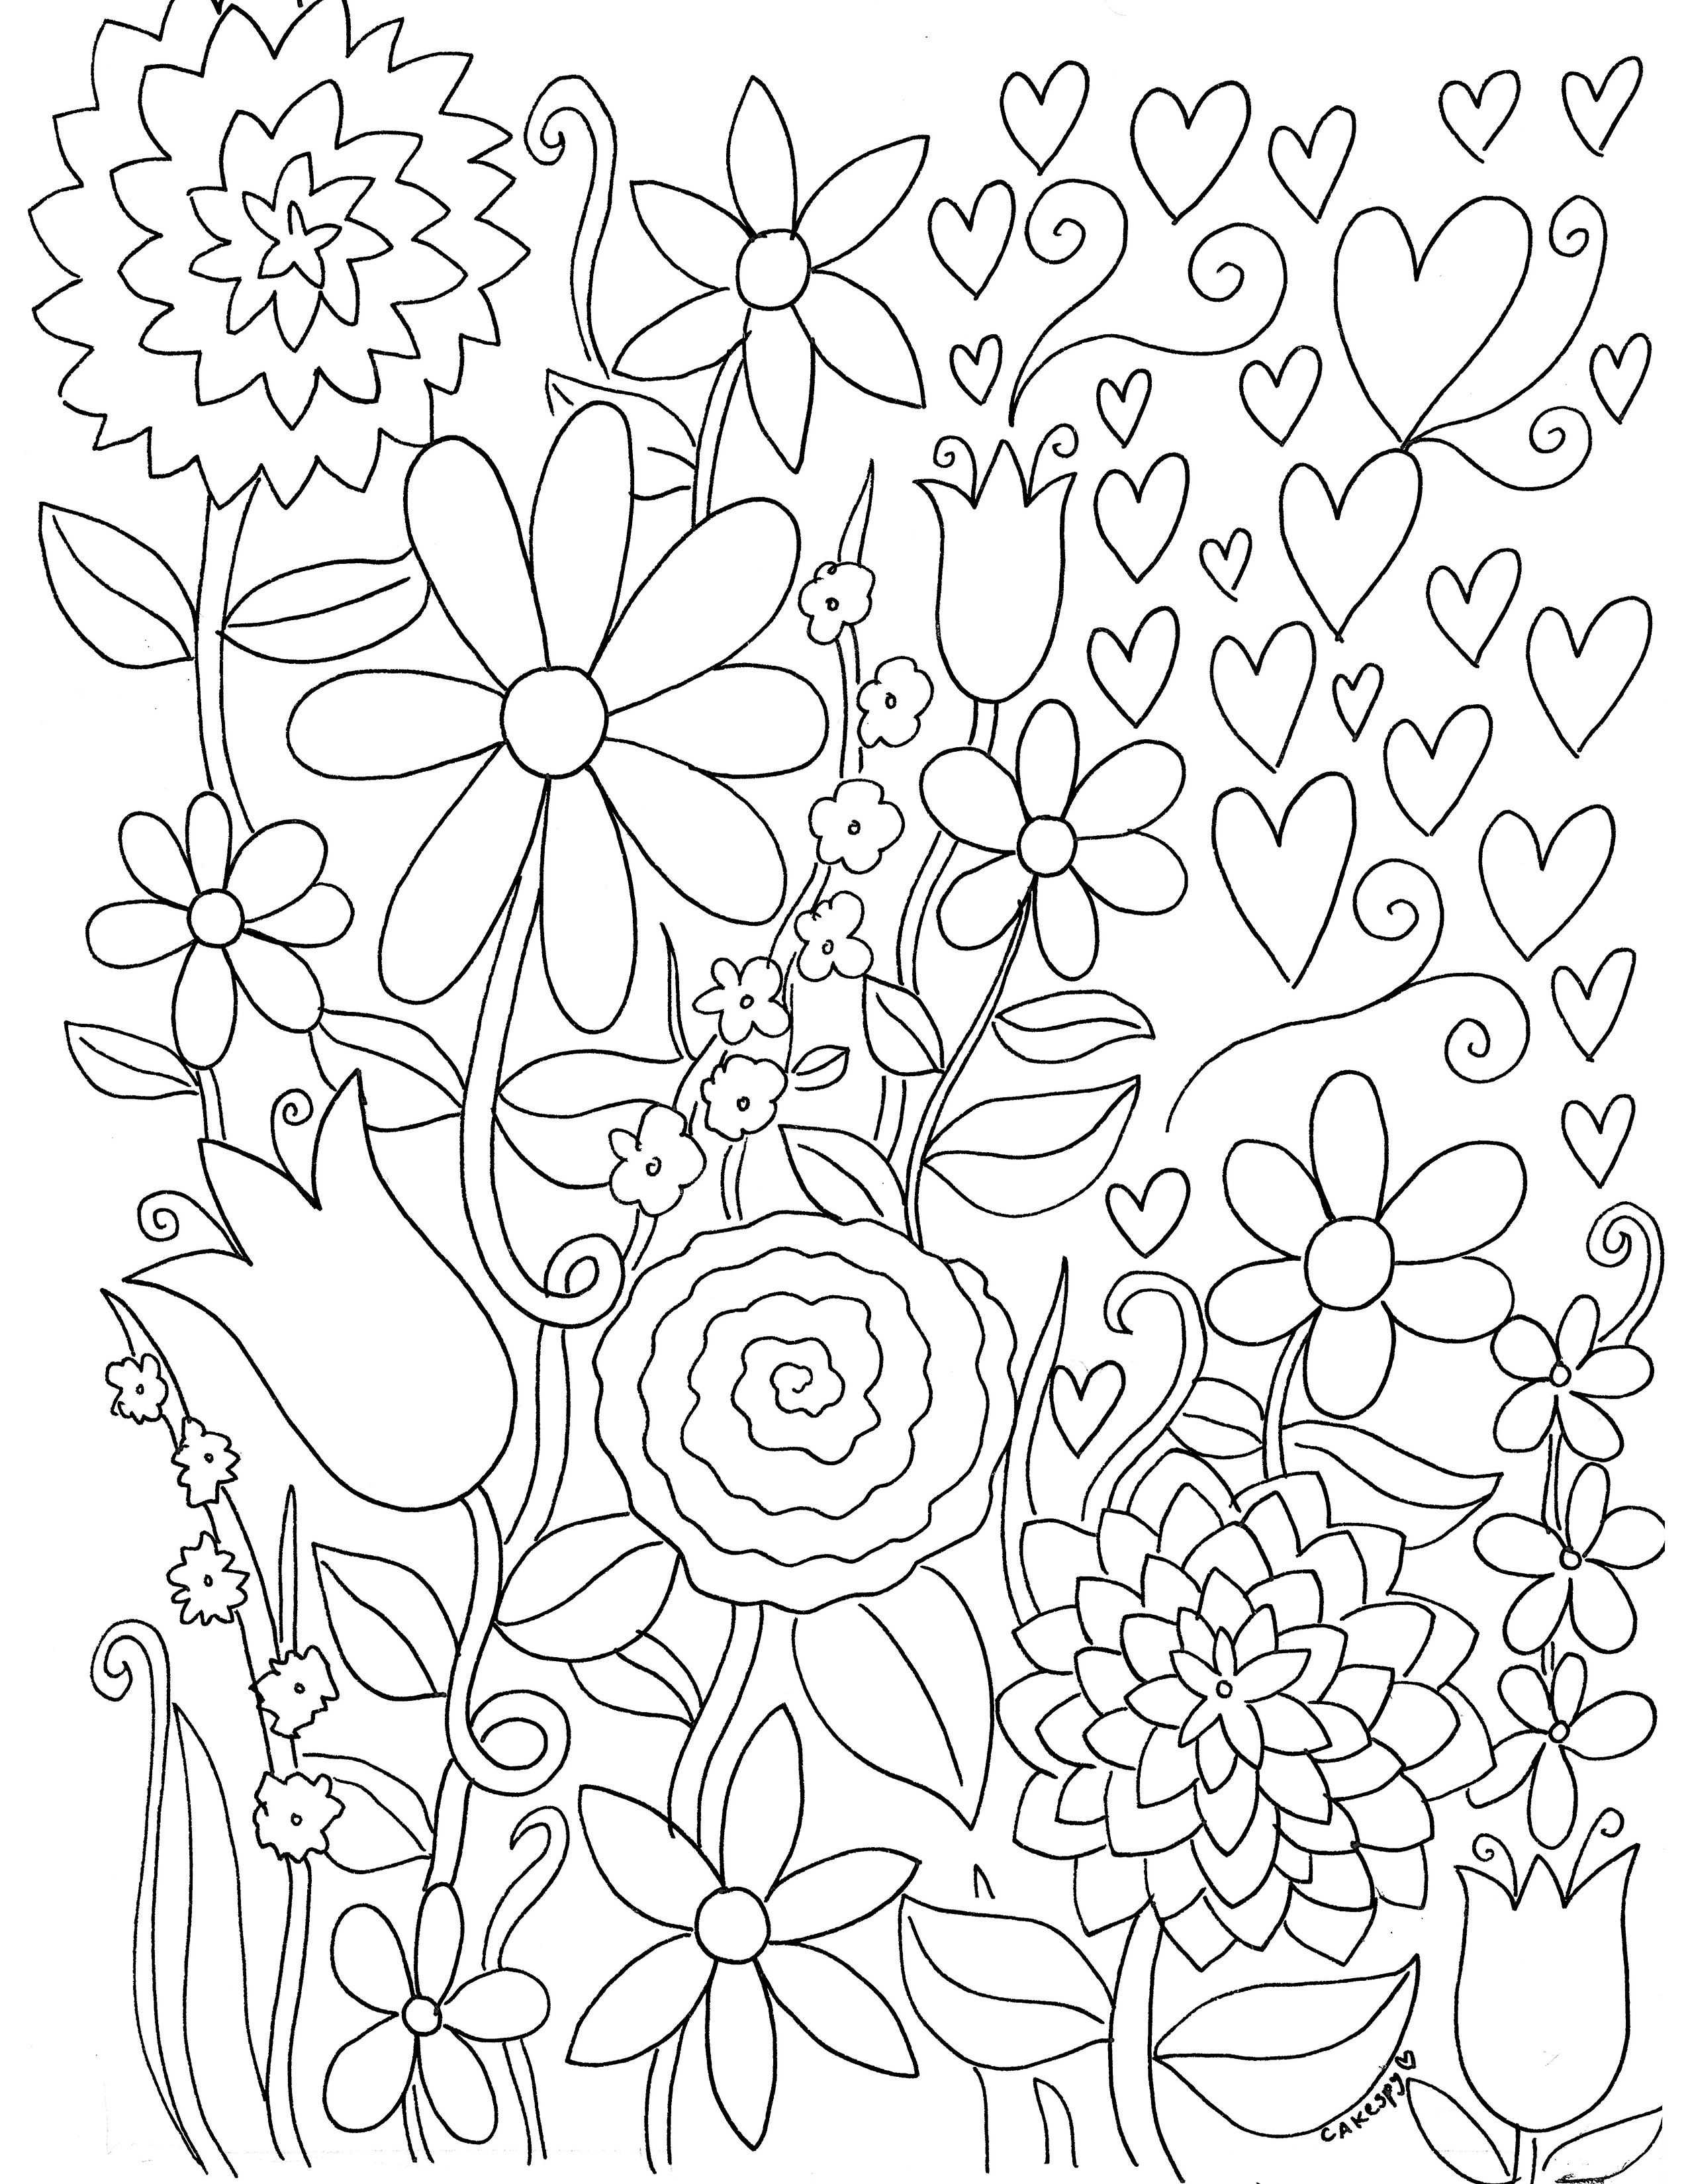 Free Paintnumbers For Adults Downloadable | *printable Art - Free Coloring Pages Com Printable